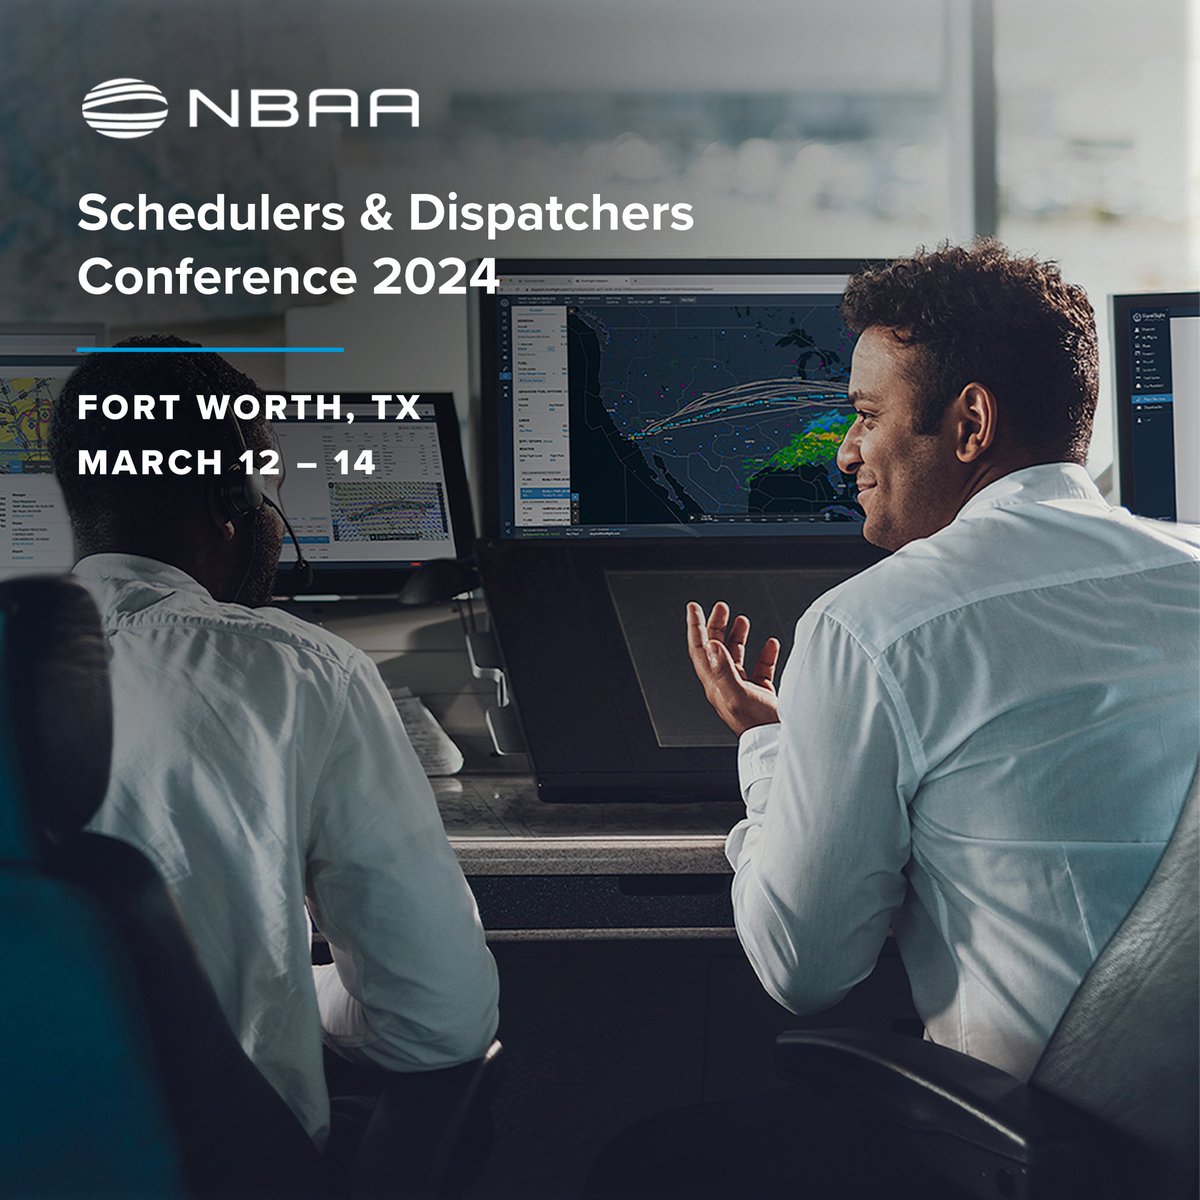 Mark your calendars for the 2024 NBAA Schedulers & Dispatchers Conference from March 12-14 in Fort Worth, Texas. 🔗 - Register now at nbaa.org/sdc2024 to secure your spot!